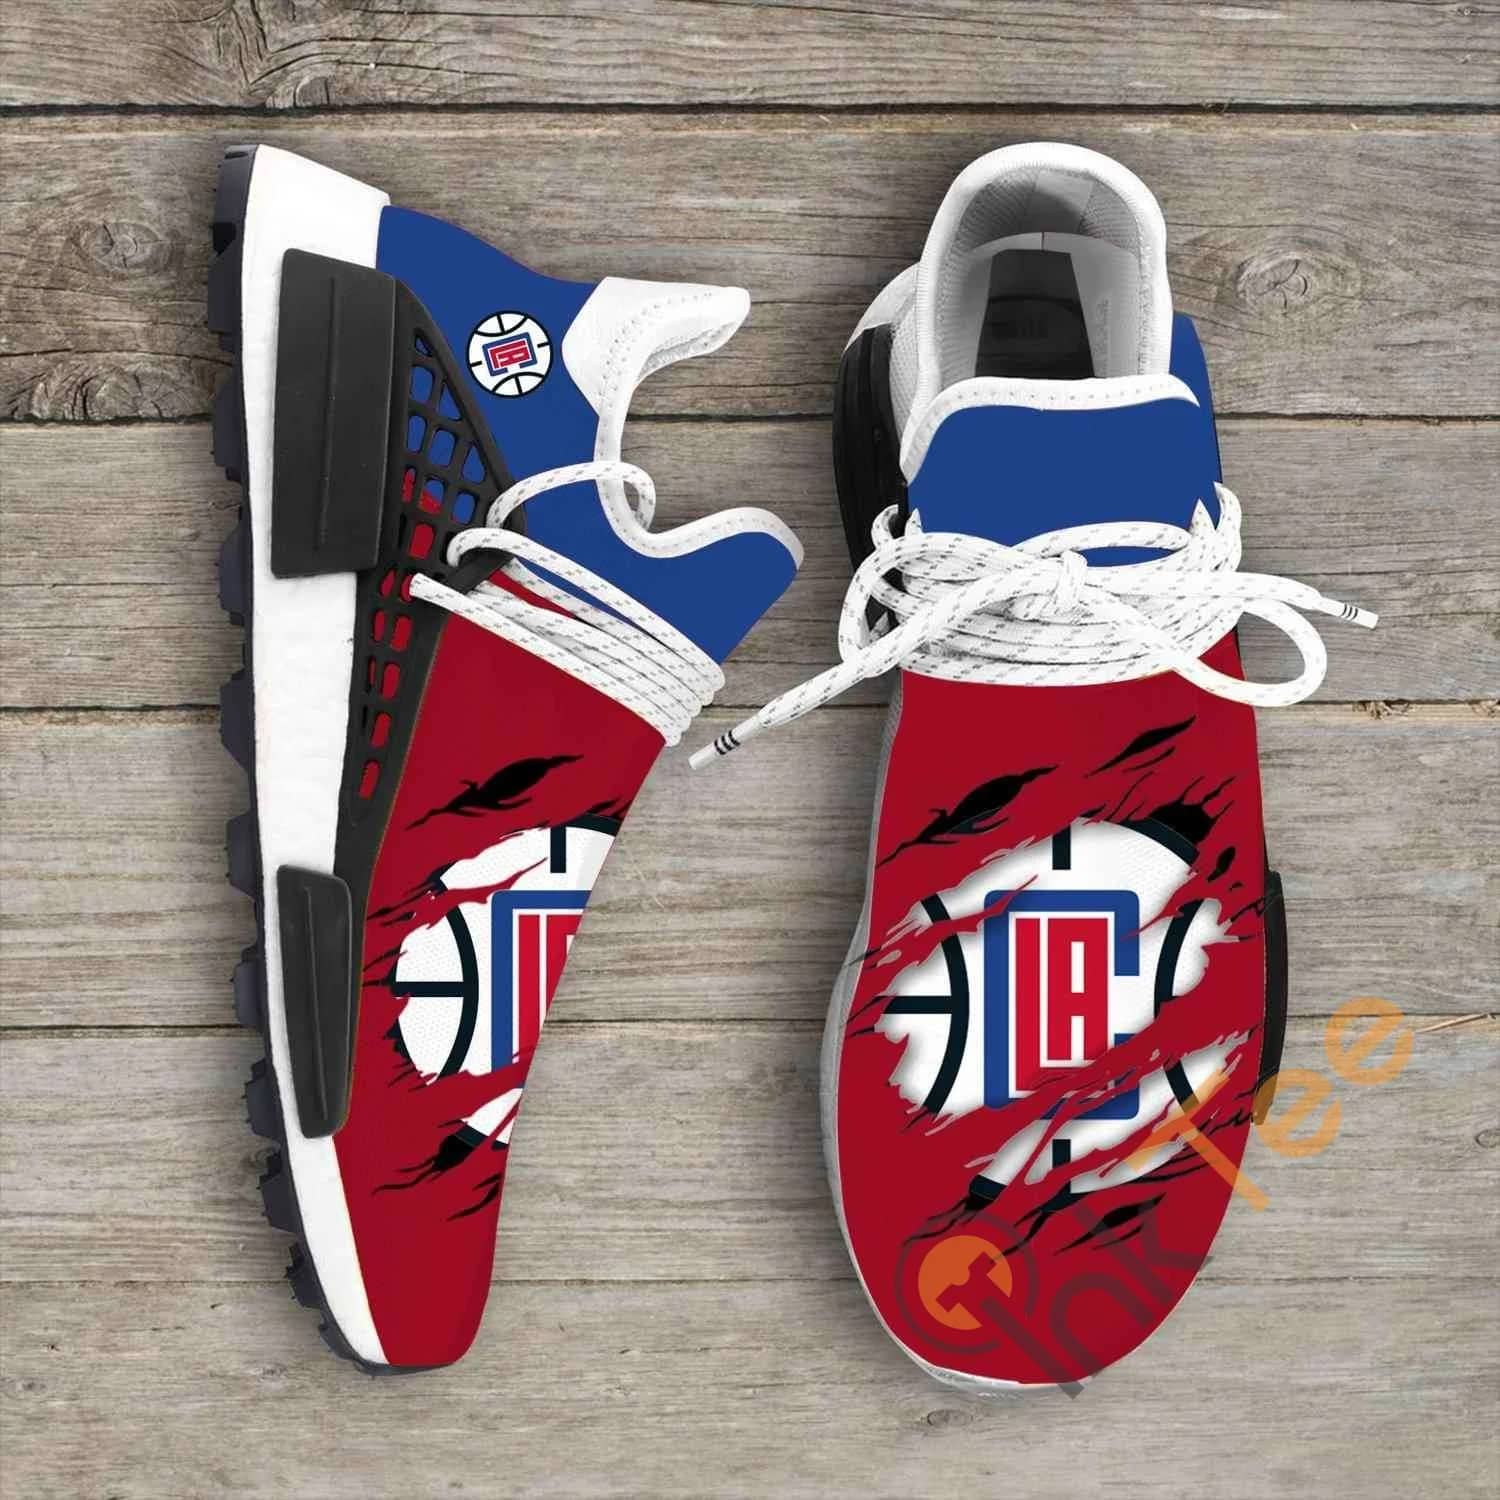 Los Angeles Clippers Nba NMD Human Shoes